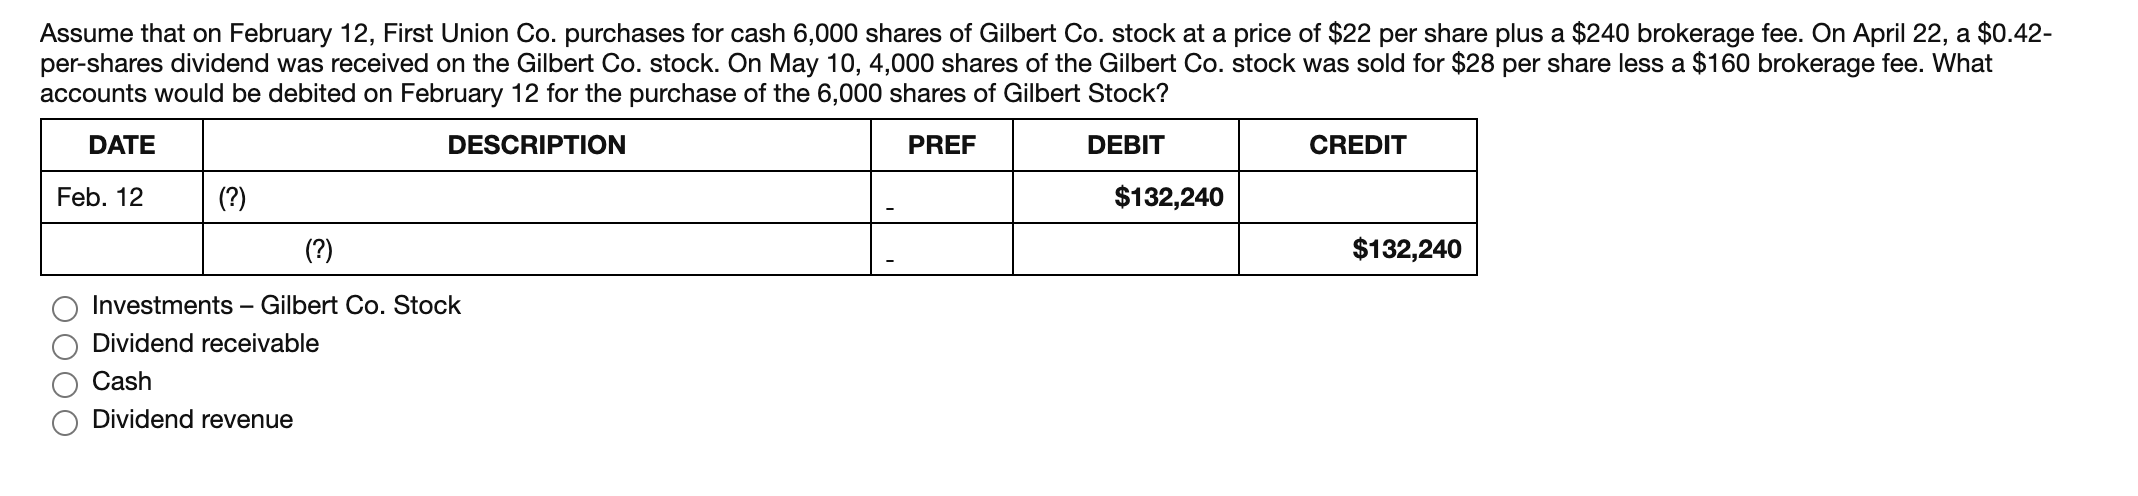 Assume that on February 12, First Union Co. purchases for cash 6,000 shares of Gilbert Co. stock at a price of $22 per share plus a $240 brokerage fee. On April 22, a $0.42-
per-shares dividend was received on the Gilbert Co. stock. On May 10, 4,000 shares of the Gilbert Co. stock was sold for $28 per share less a $160 brokerage fee. What
accounts would be debited on February 12 for the purchase of the 6,000 shares of Gilbert Stock?
DATE
DESCRIPTION
PREF
DEBIT
CREDIT
Feb. 12
(?)
$132,240
(?)
$132,240
Investments – Gilbert Co. Stock
Dividend receivable
Cash
Dividend revenue
